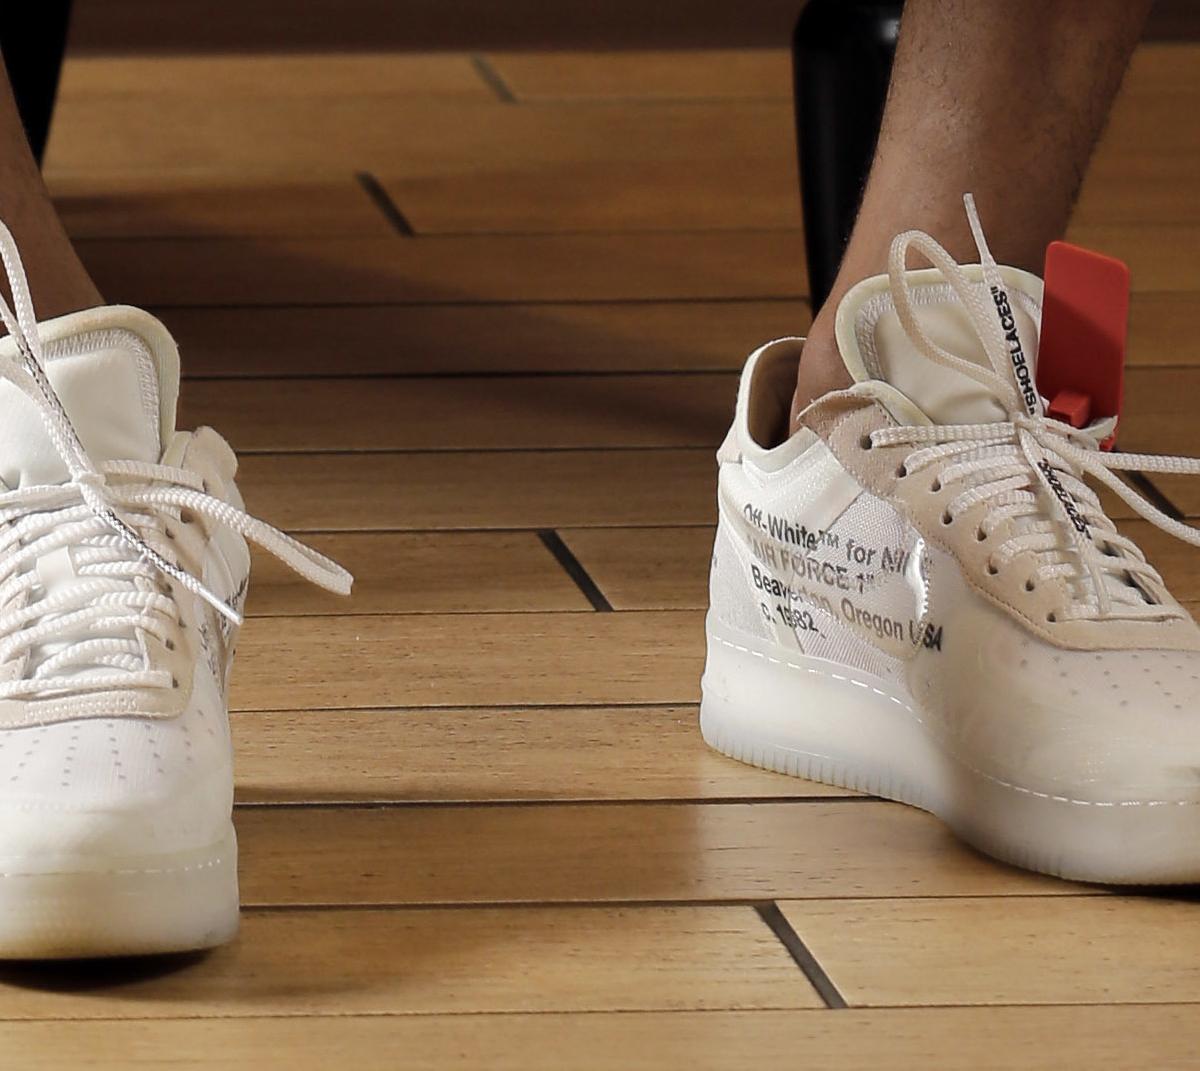 Virgil Abloh's Nike x Off-White Air Force 1 sneaker is reportedly